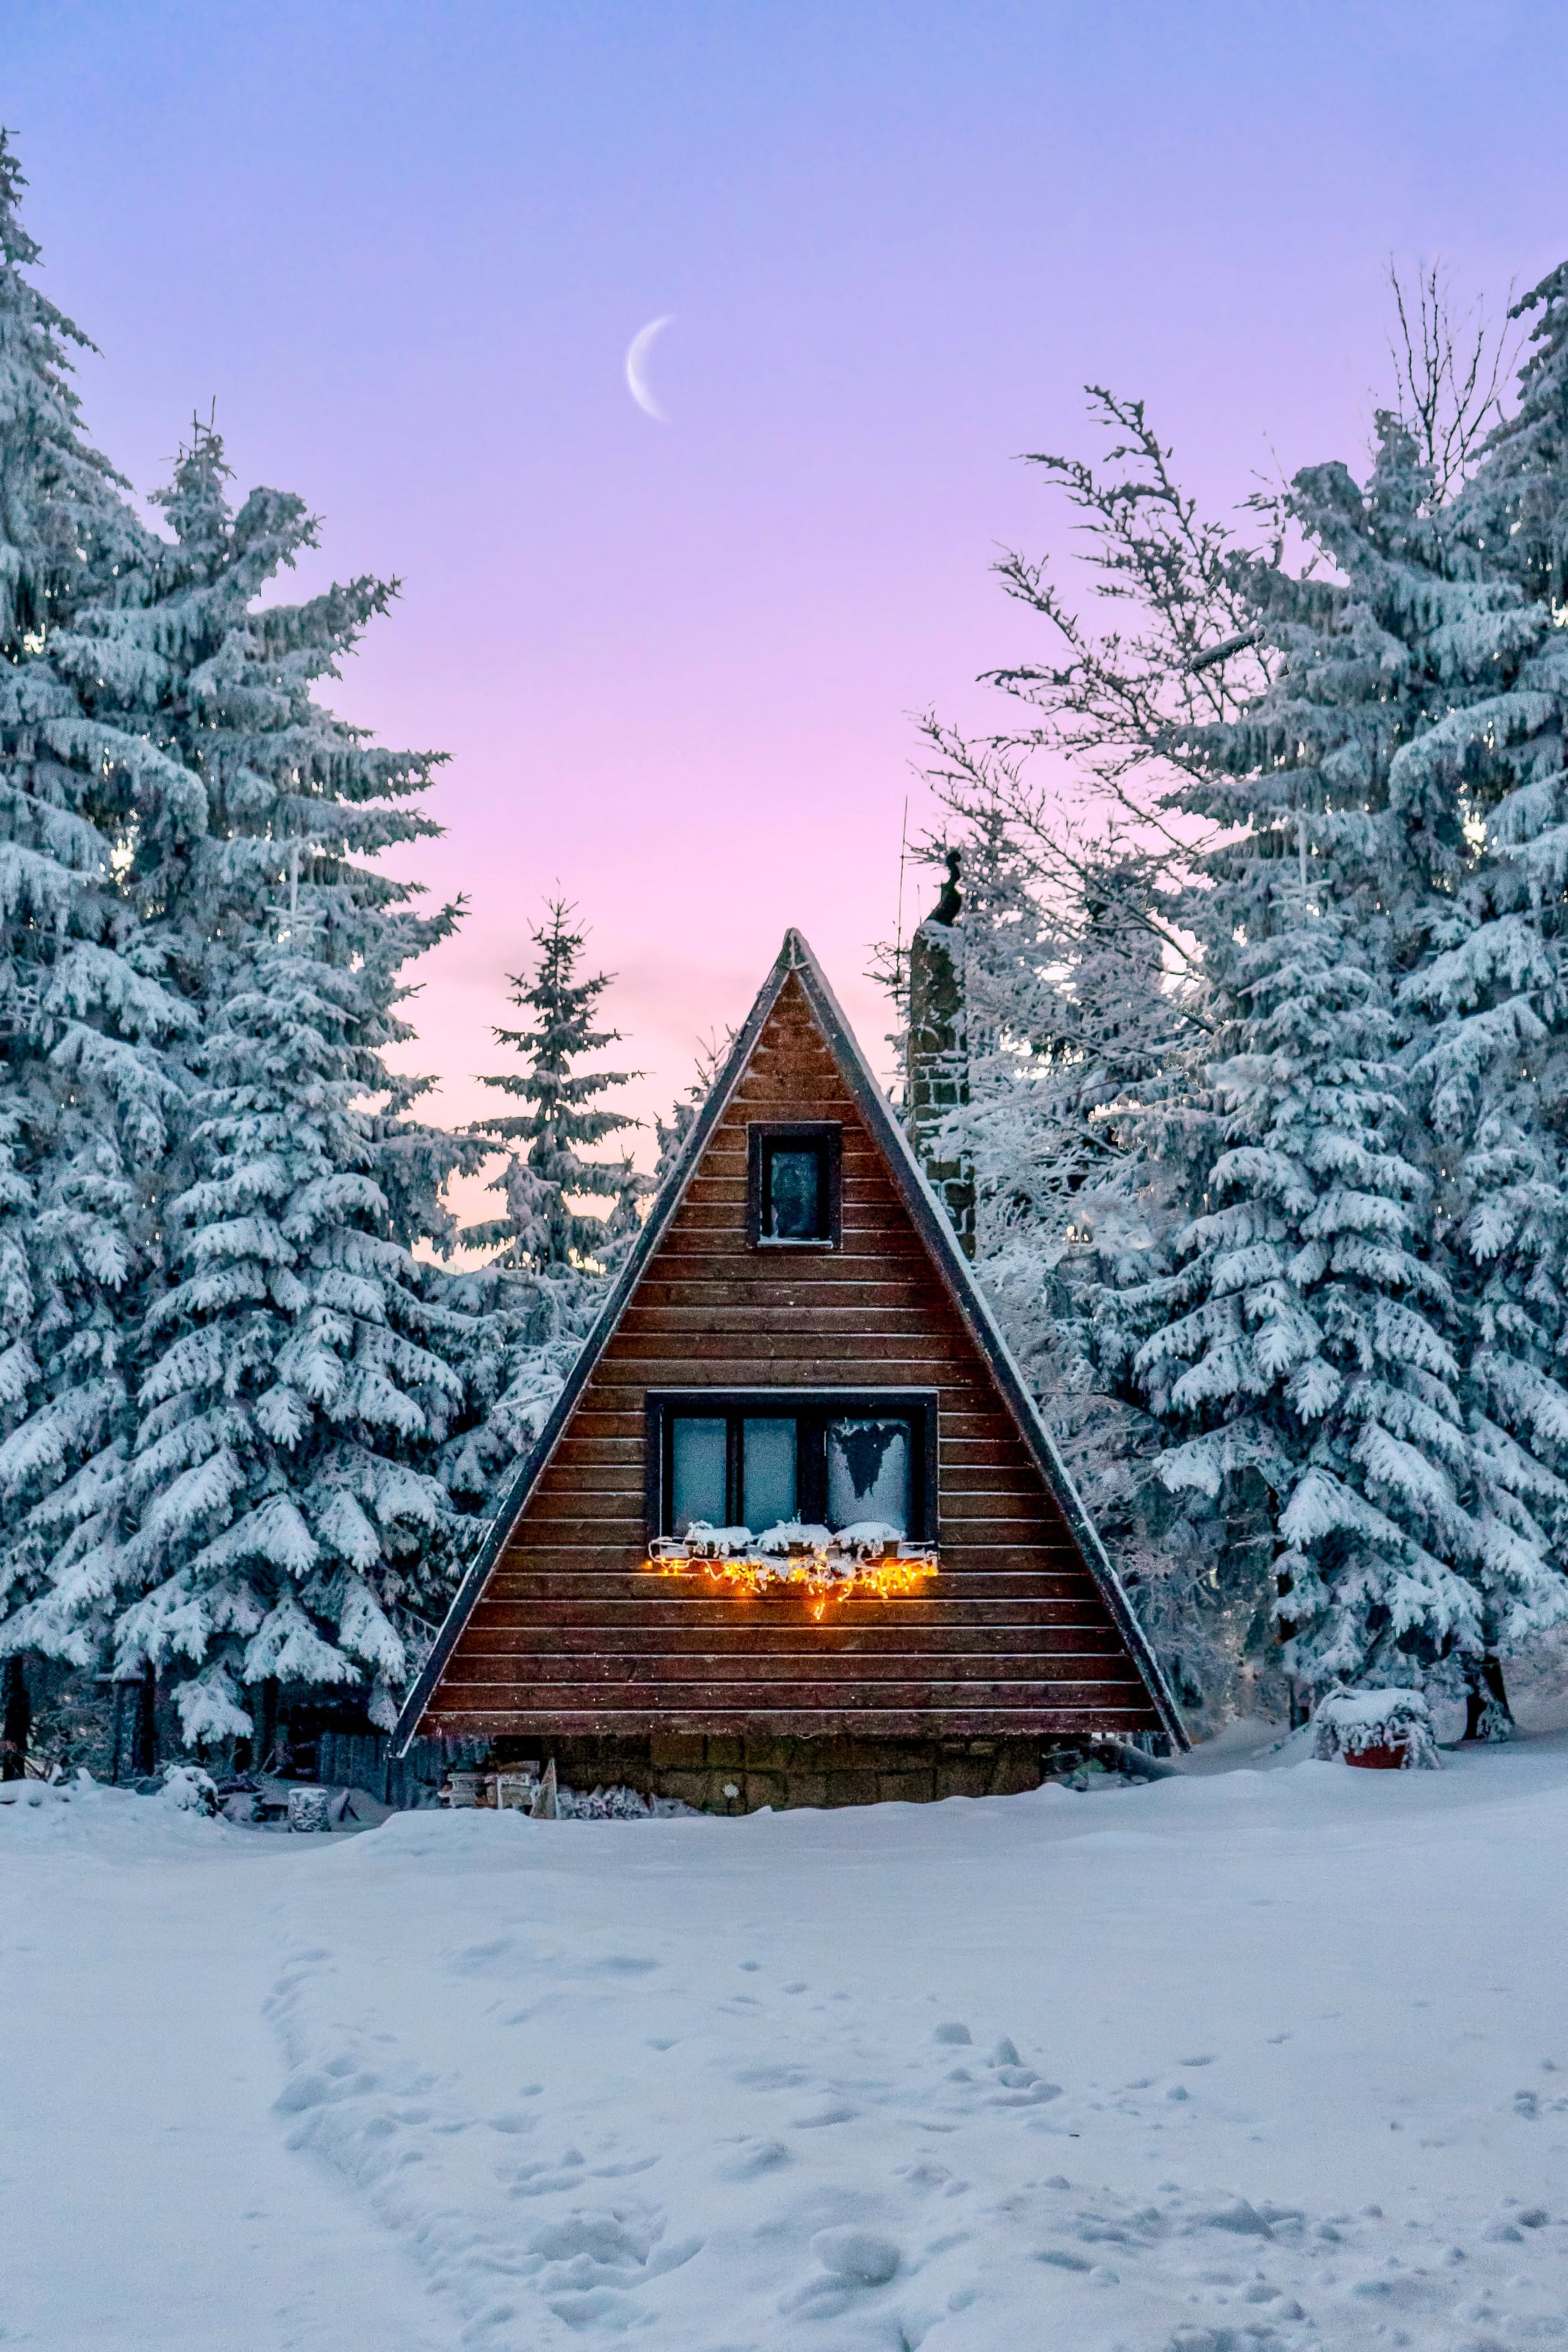 Winter Cabin iPhone Wallpaper Christmas Wallpaper That'll Make Your Home Screen Aesthetically Pleasing This Holiday